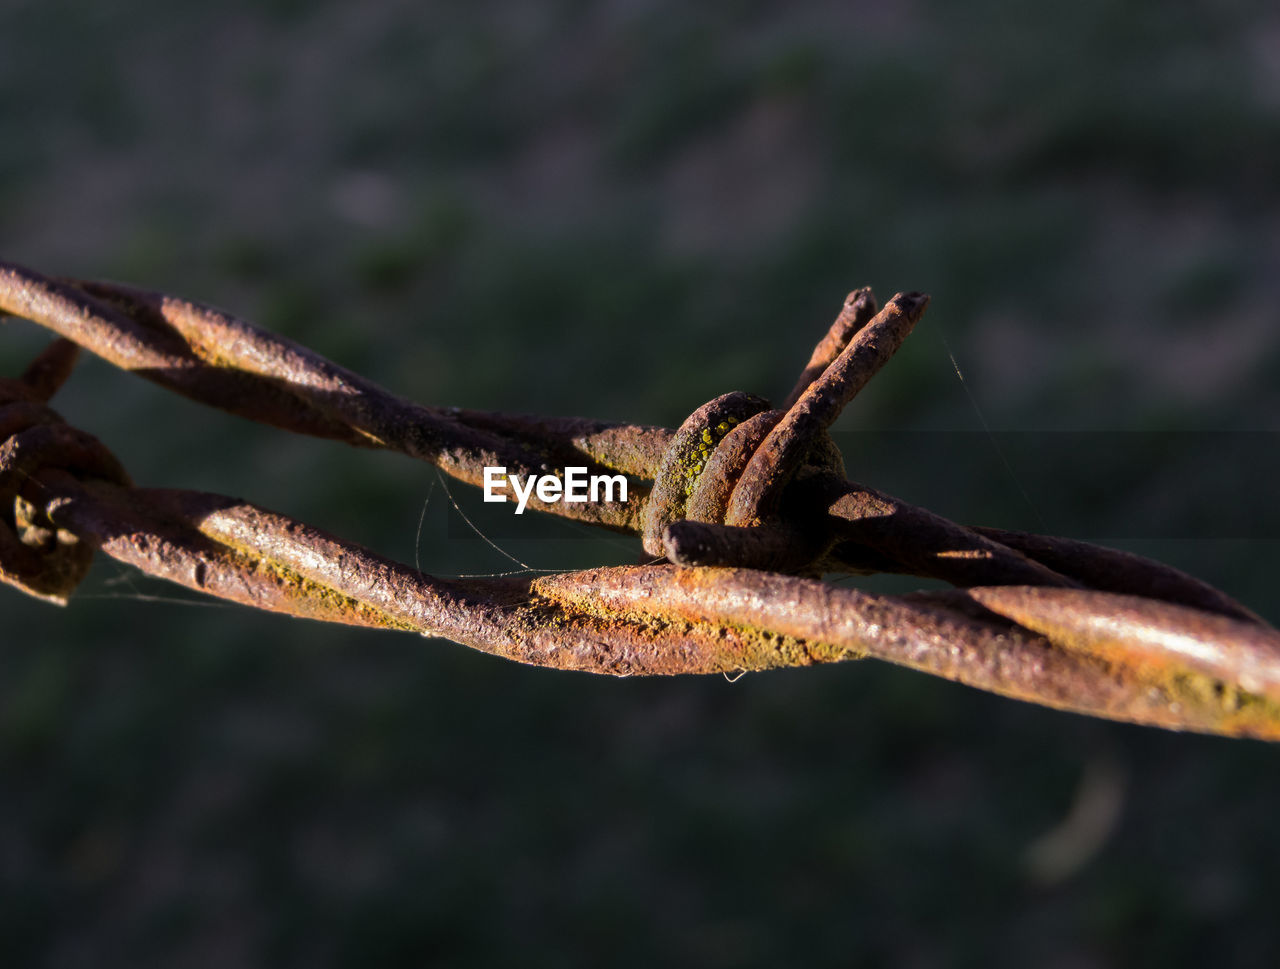 CLOSE-UP OF RUSTY BARBED WIRE ON FENCE